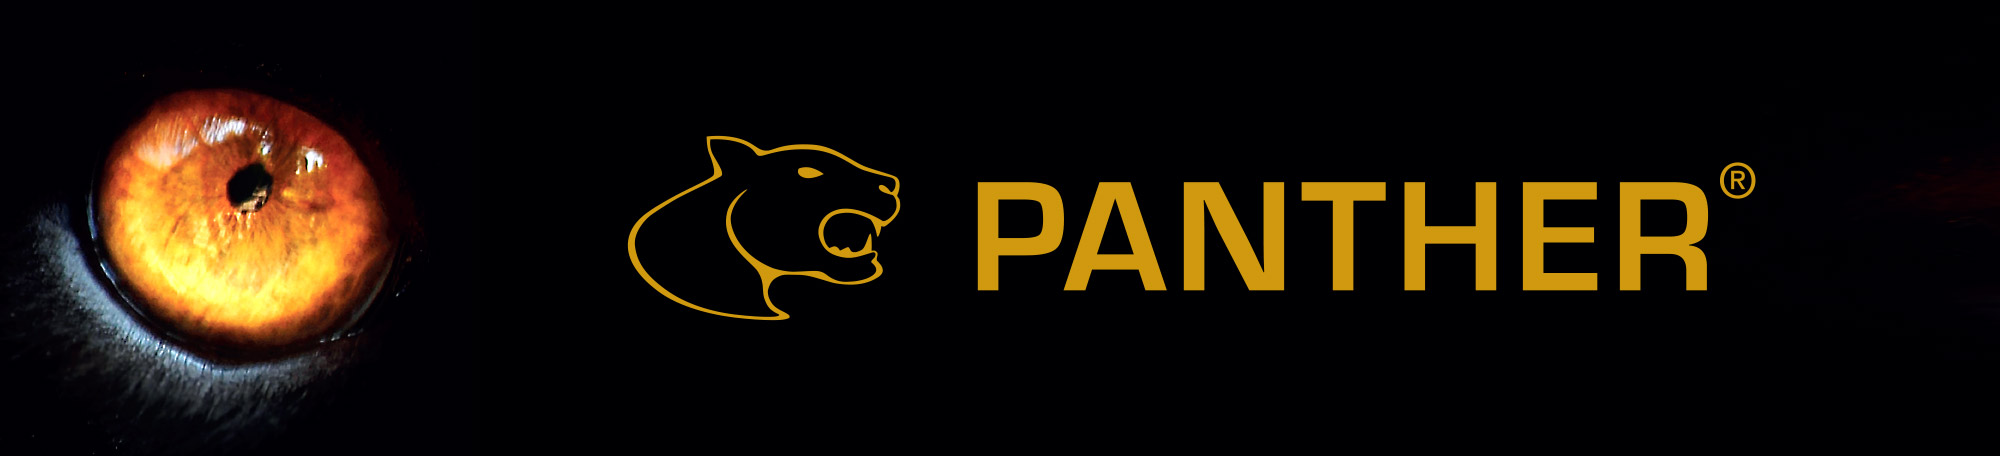 Panther-chainsaw-mills-logo